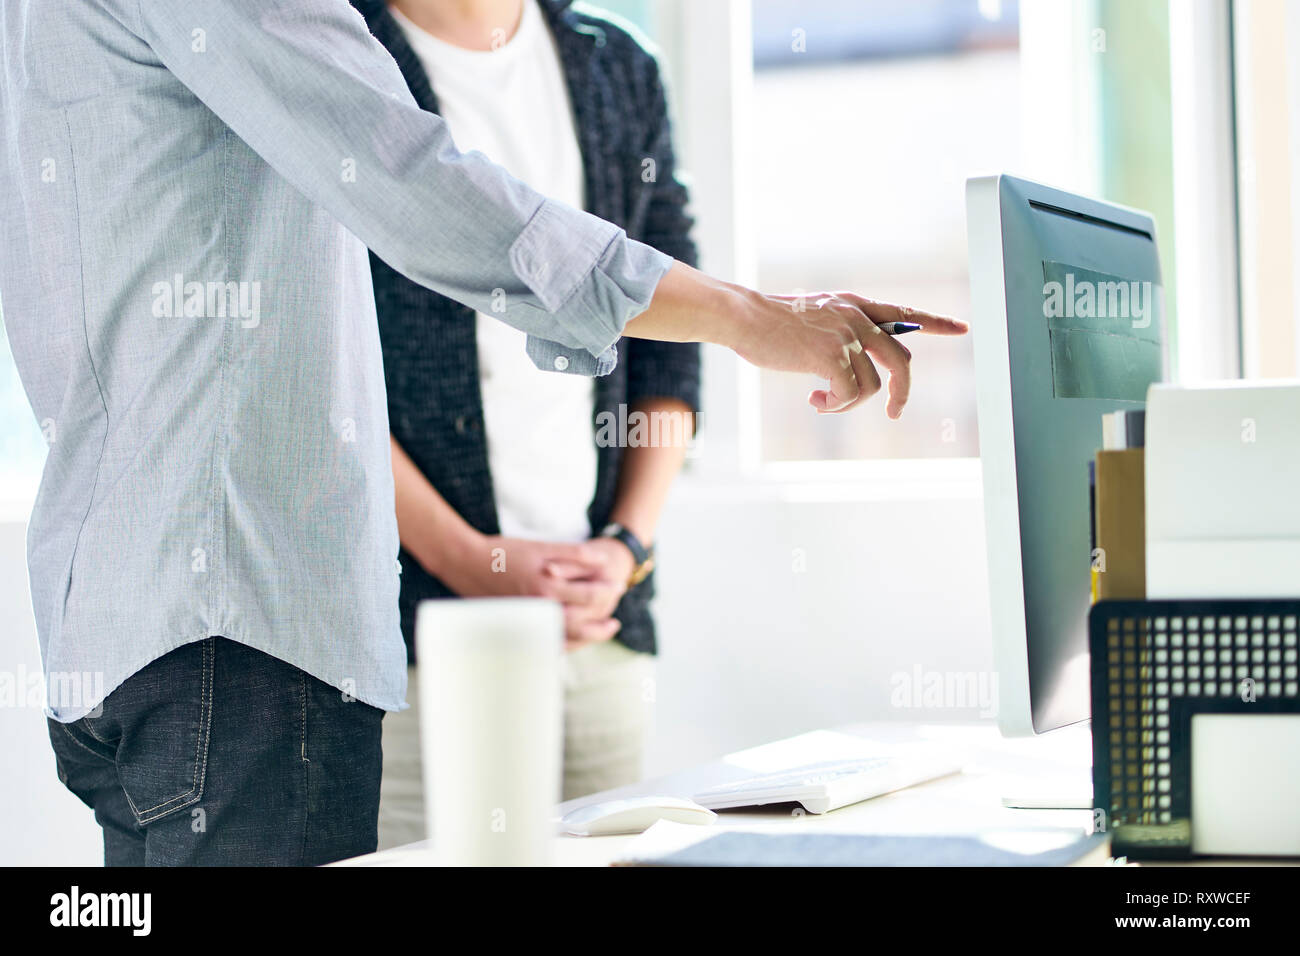 two young asian corporate executives working together using desktop computer. Stock Photo